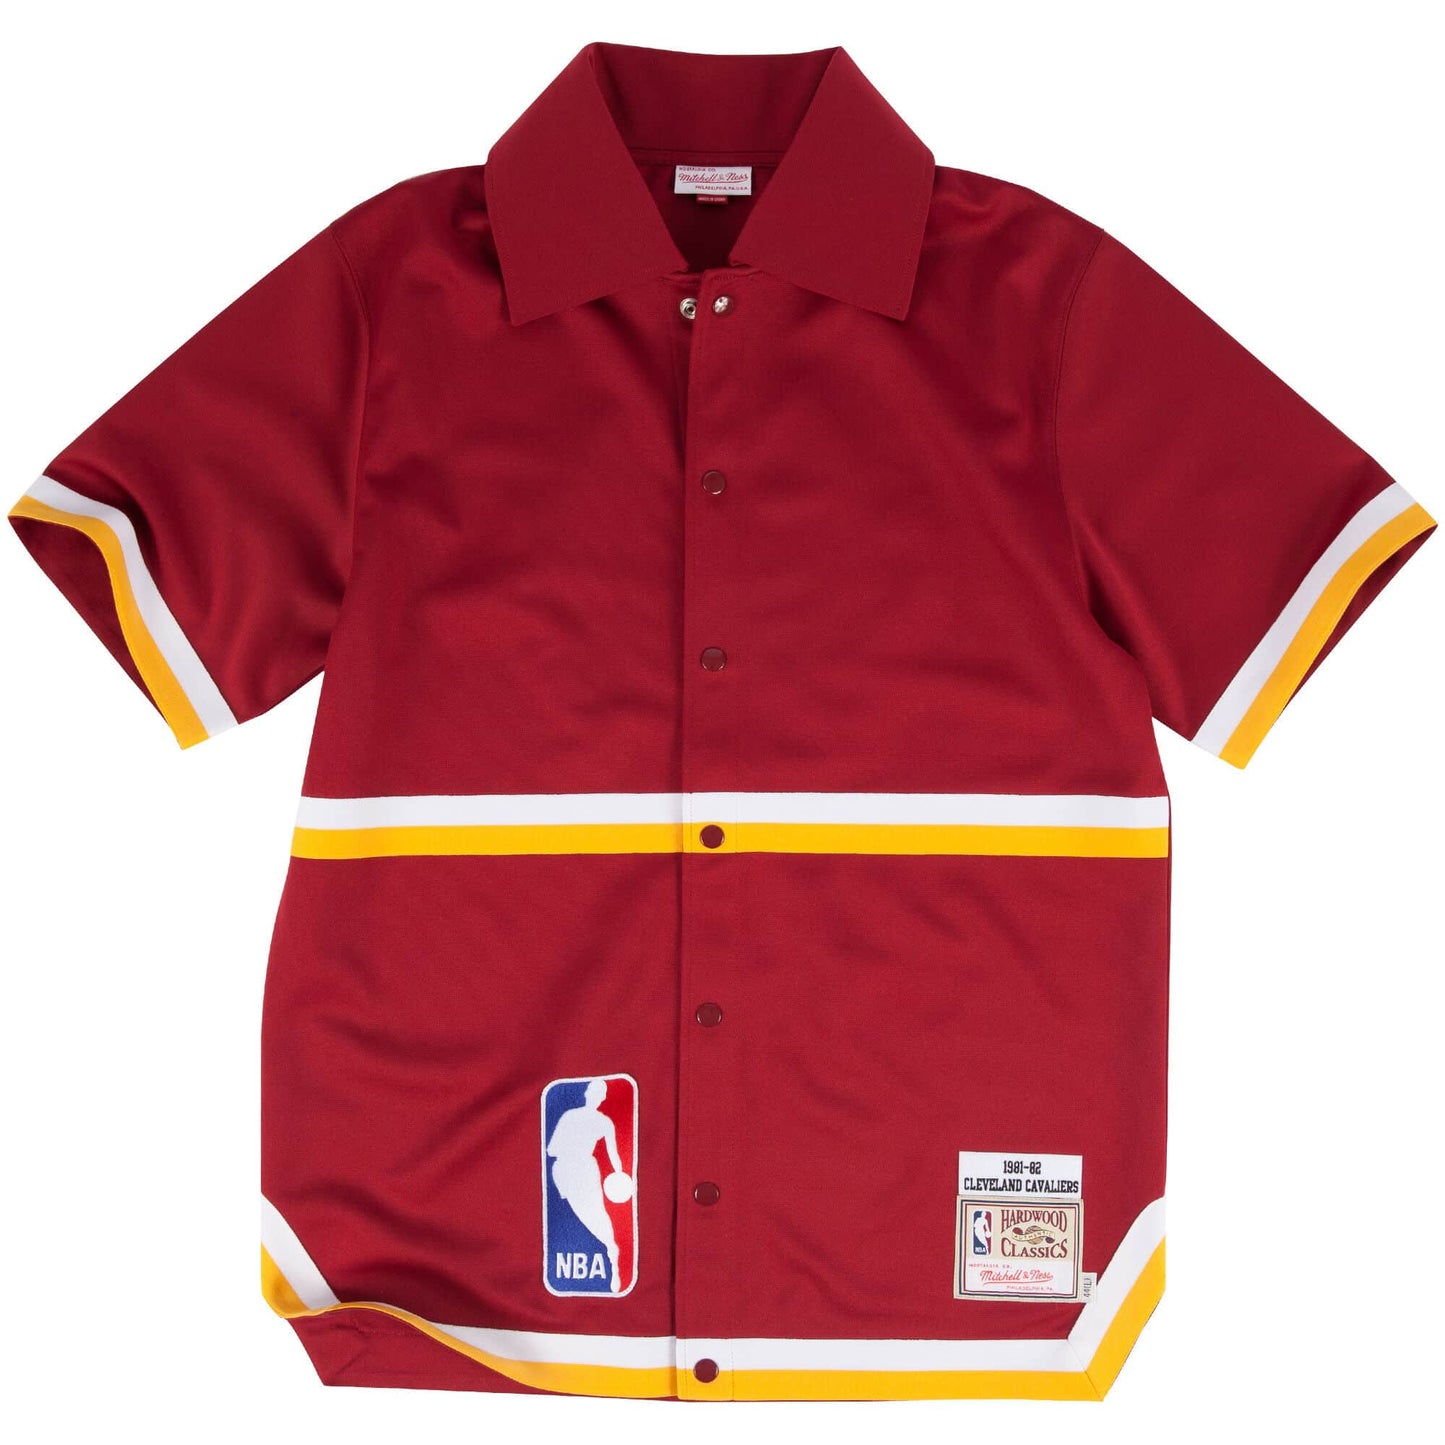 1981-82 Authentic Shooting Shirt Cleveland Cavaliers